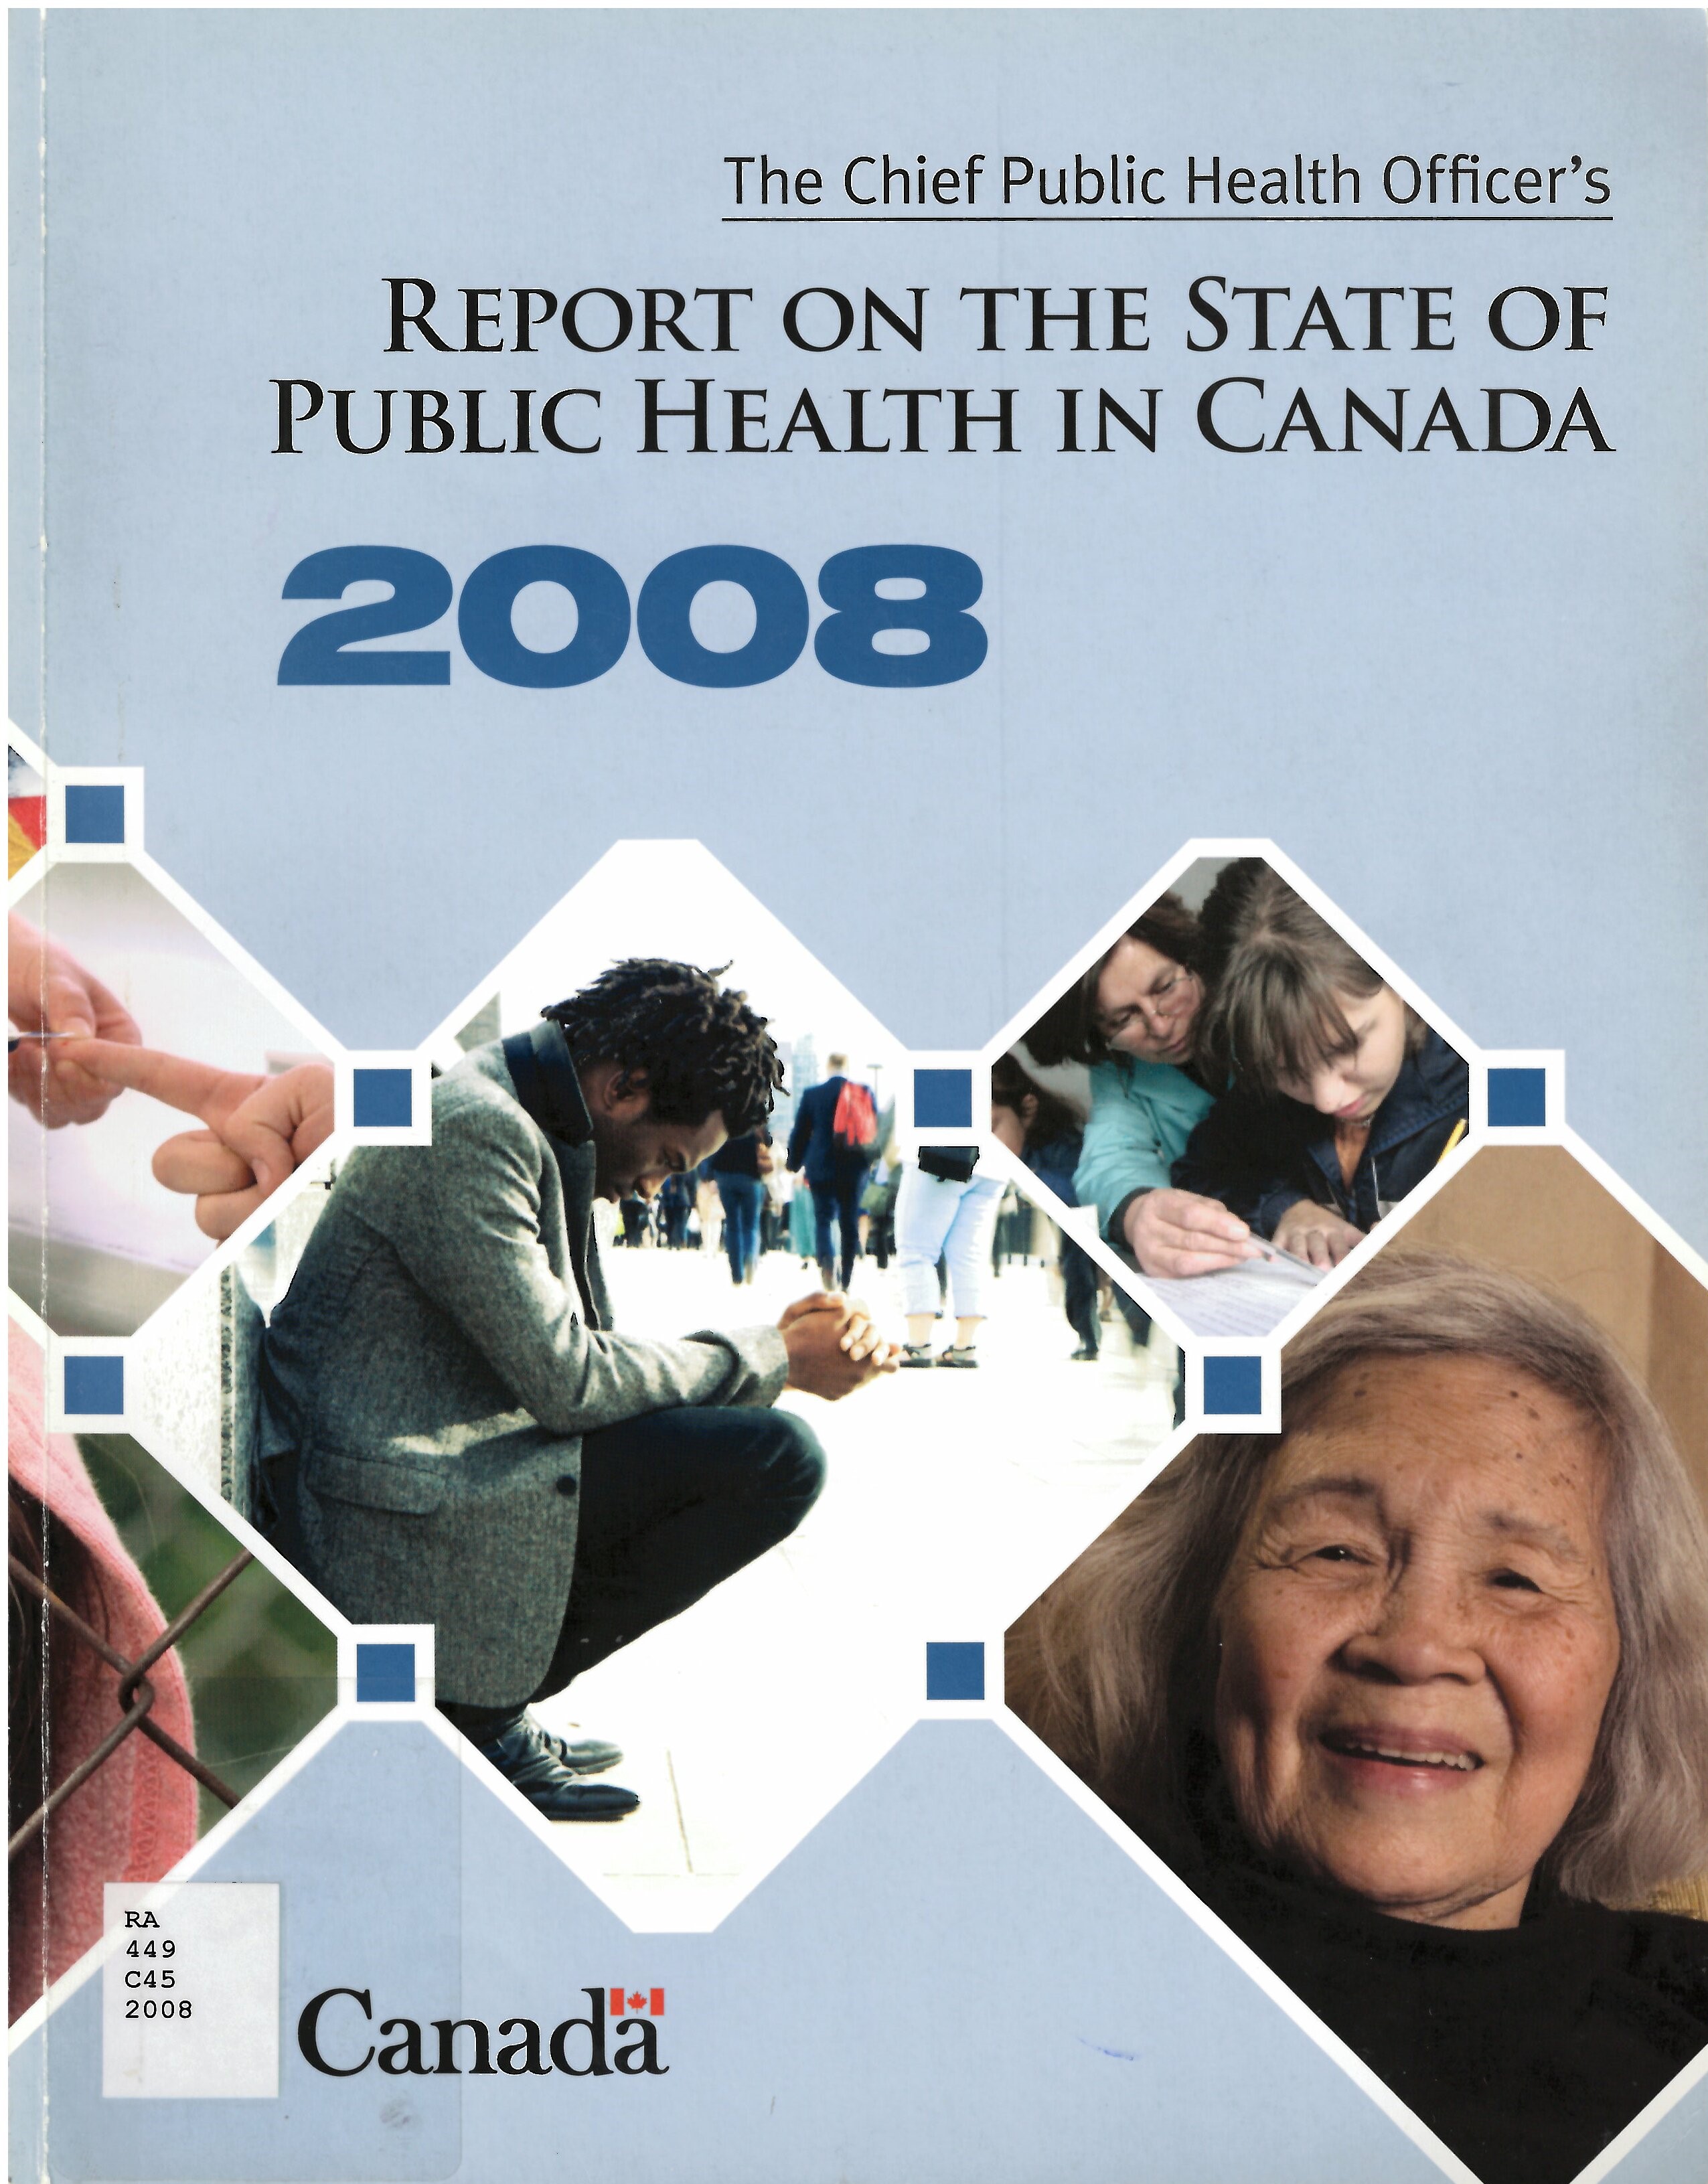 The Chief Public Health Officer's report on the state of public health in Canada